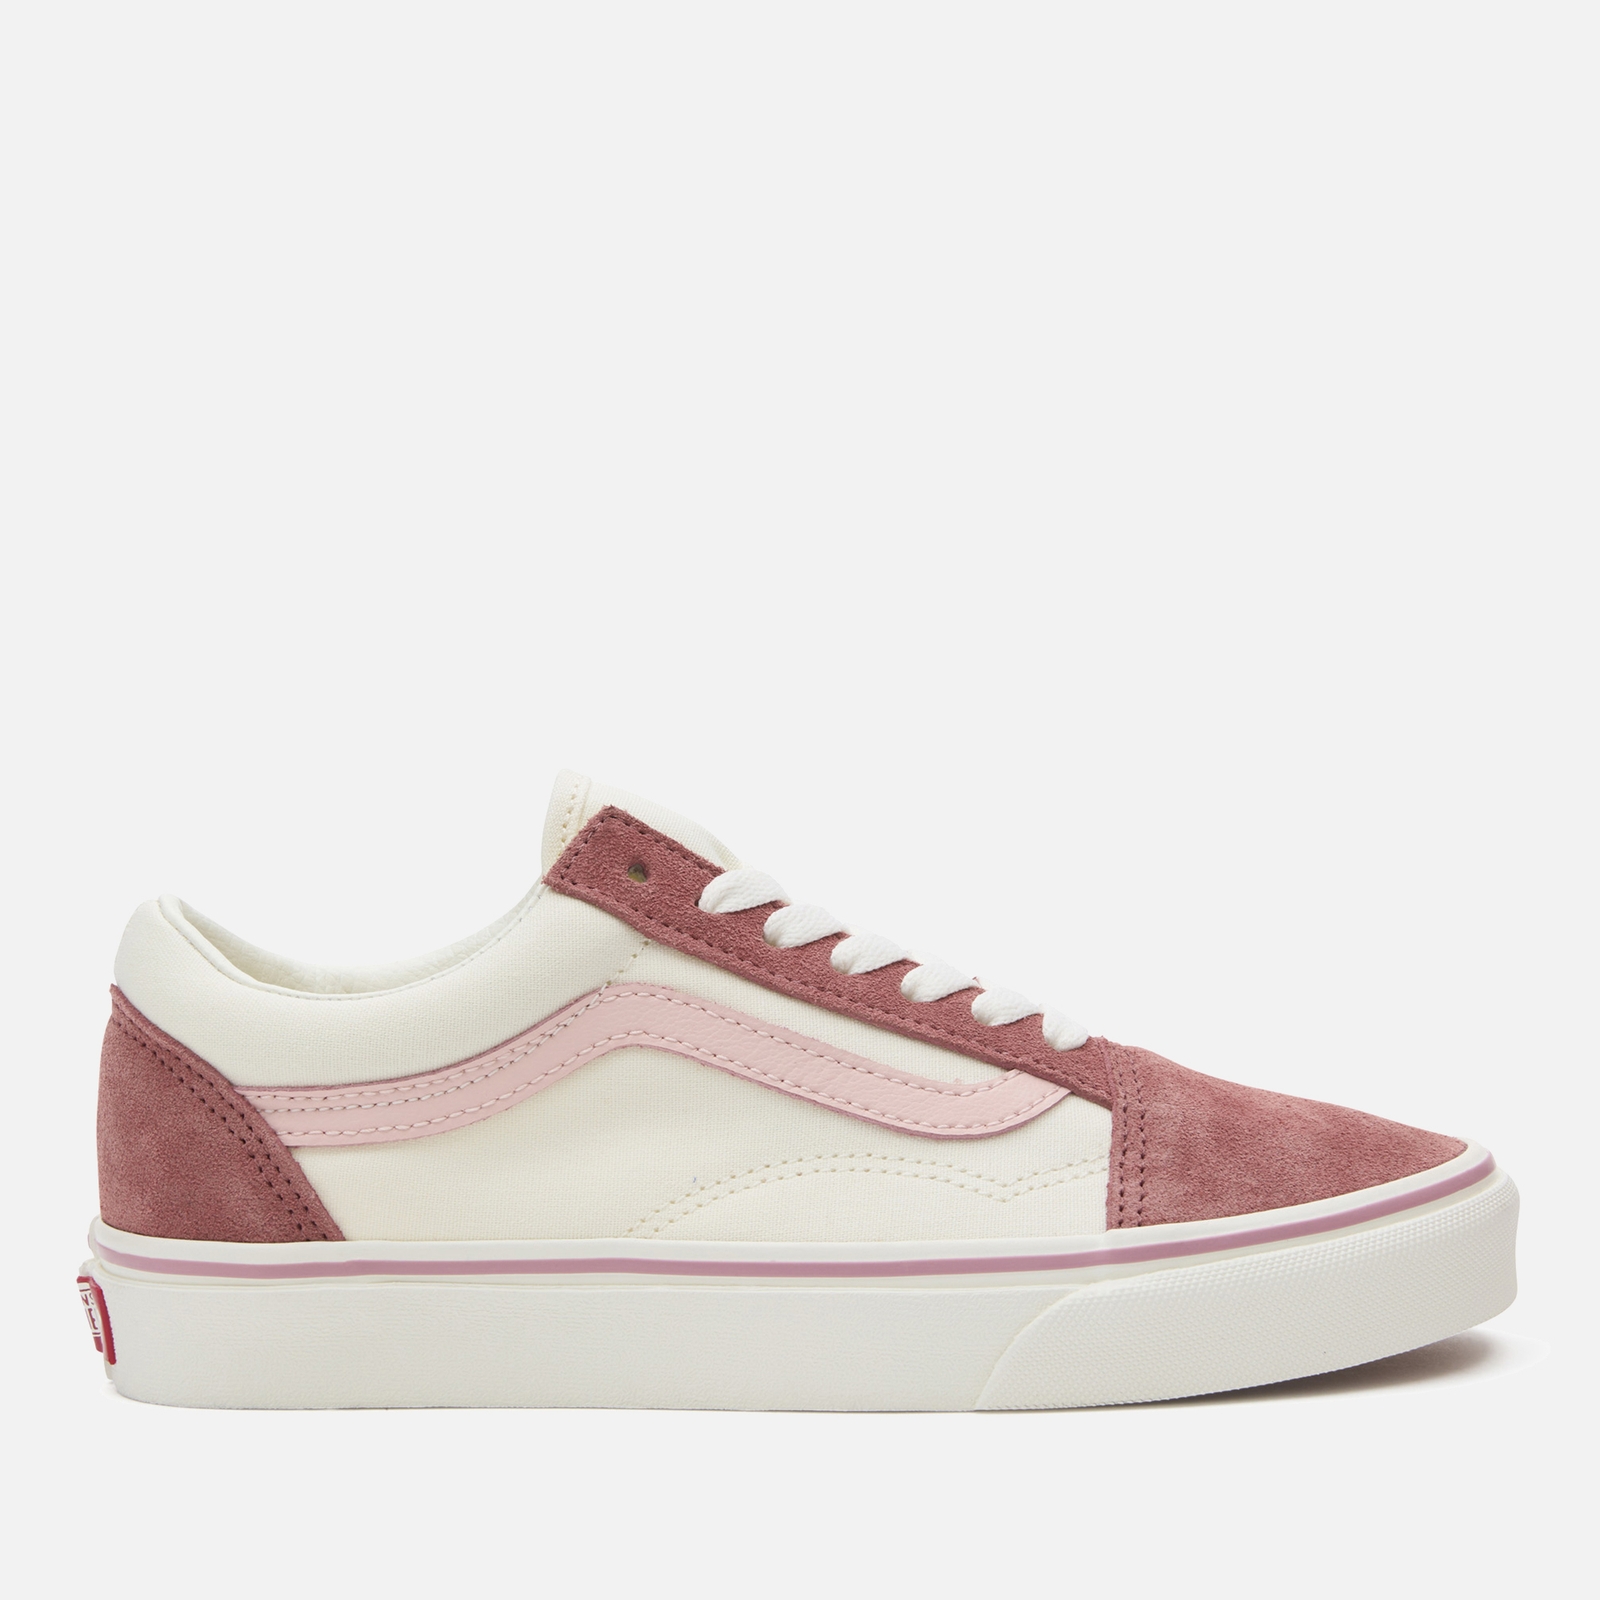 Vans Women’s Old Skool Suede and Canvas Trainers